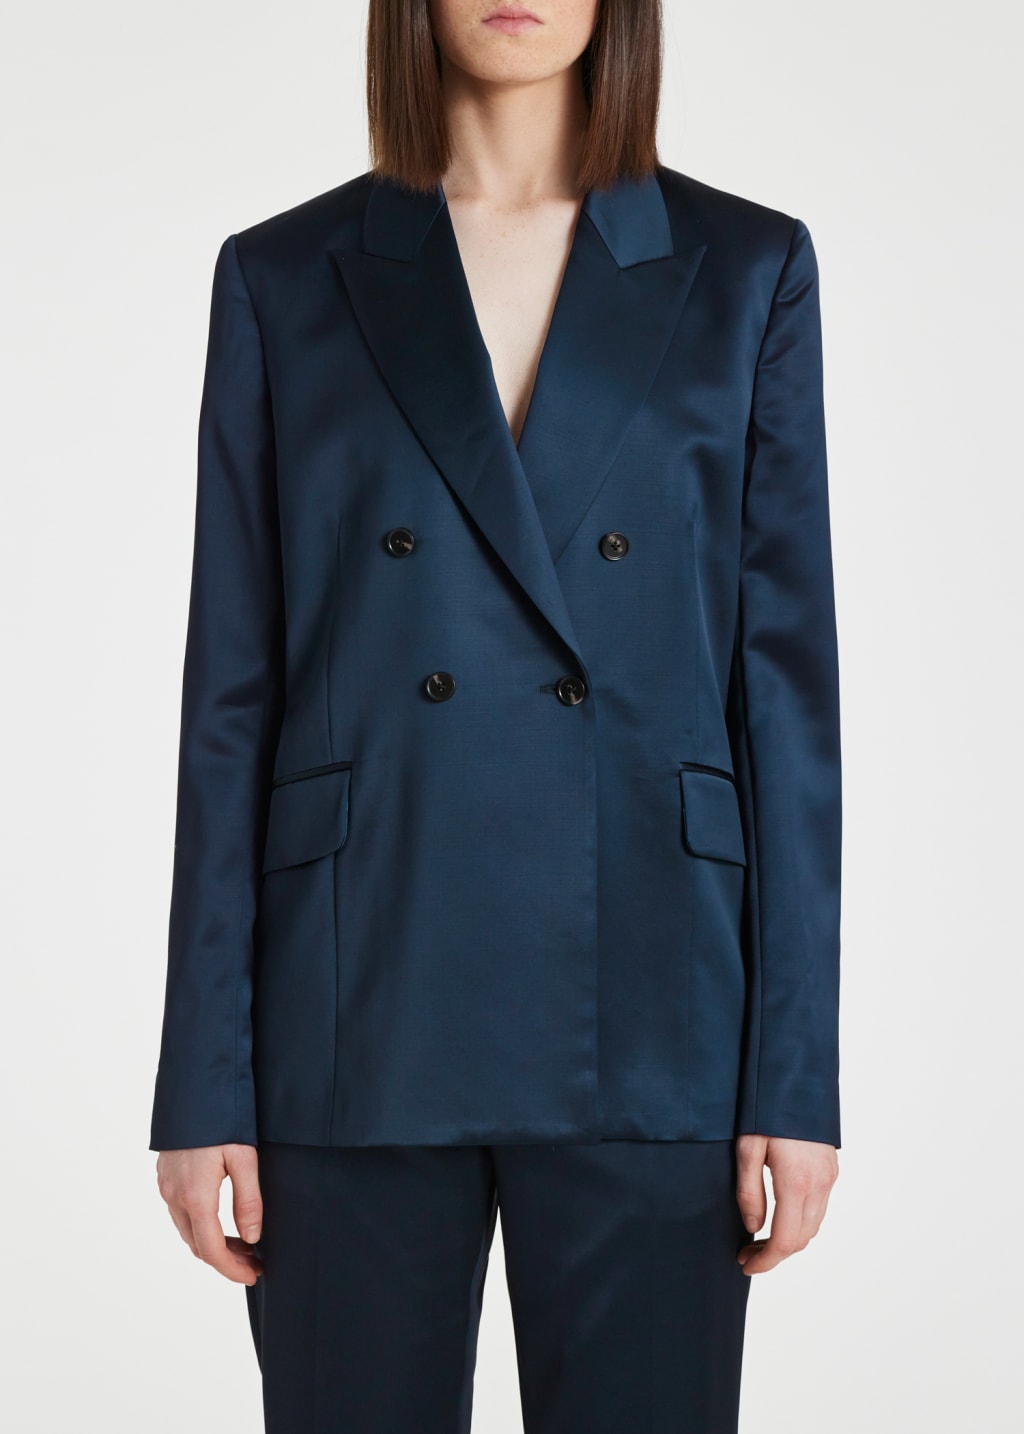 Model View - Women's Navy Satin Double Breasted Jacket by Paul Smith